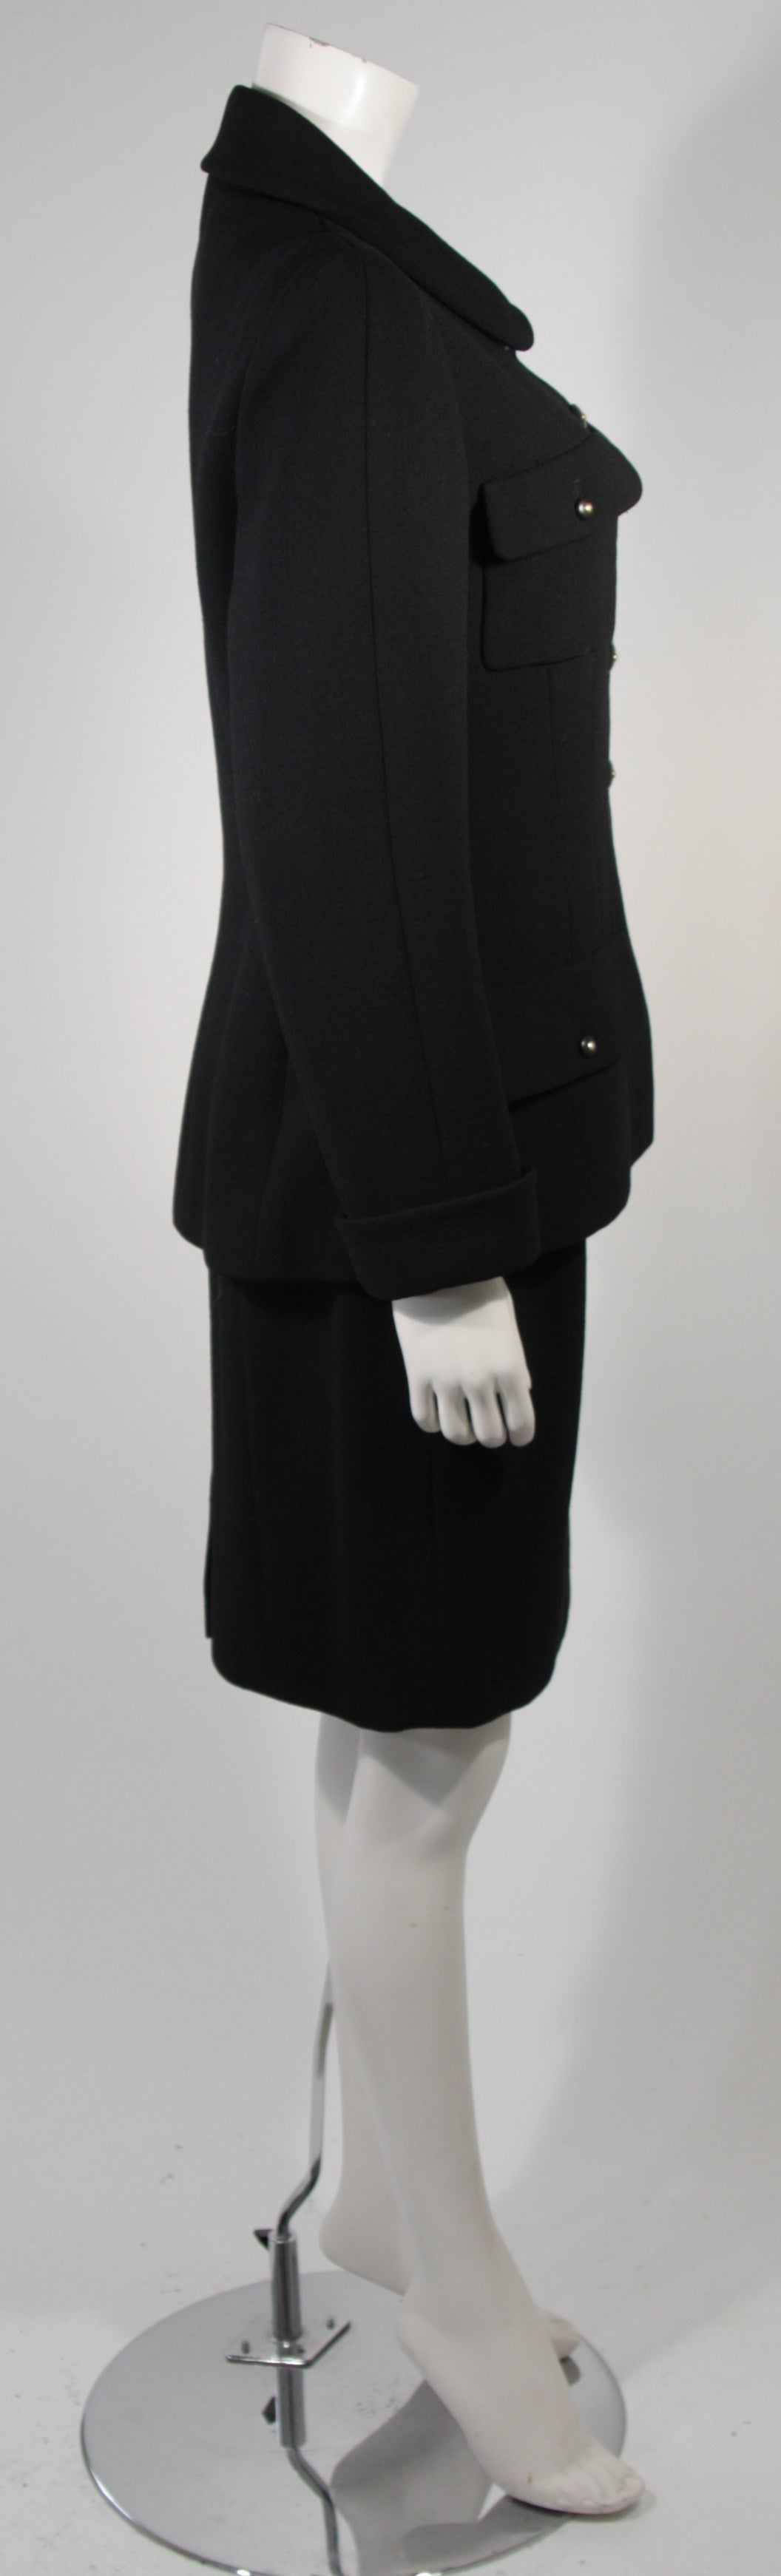 Chanel Black Wool Skirt Suit Size Military Inspired with Peter Pan Collar sz 8 1